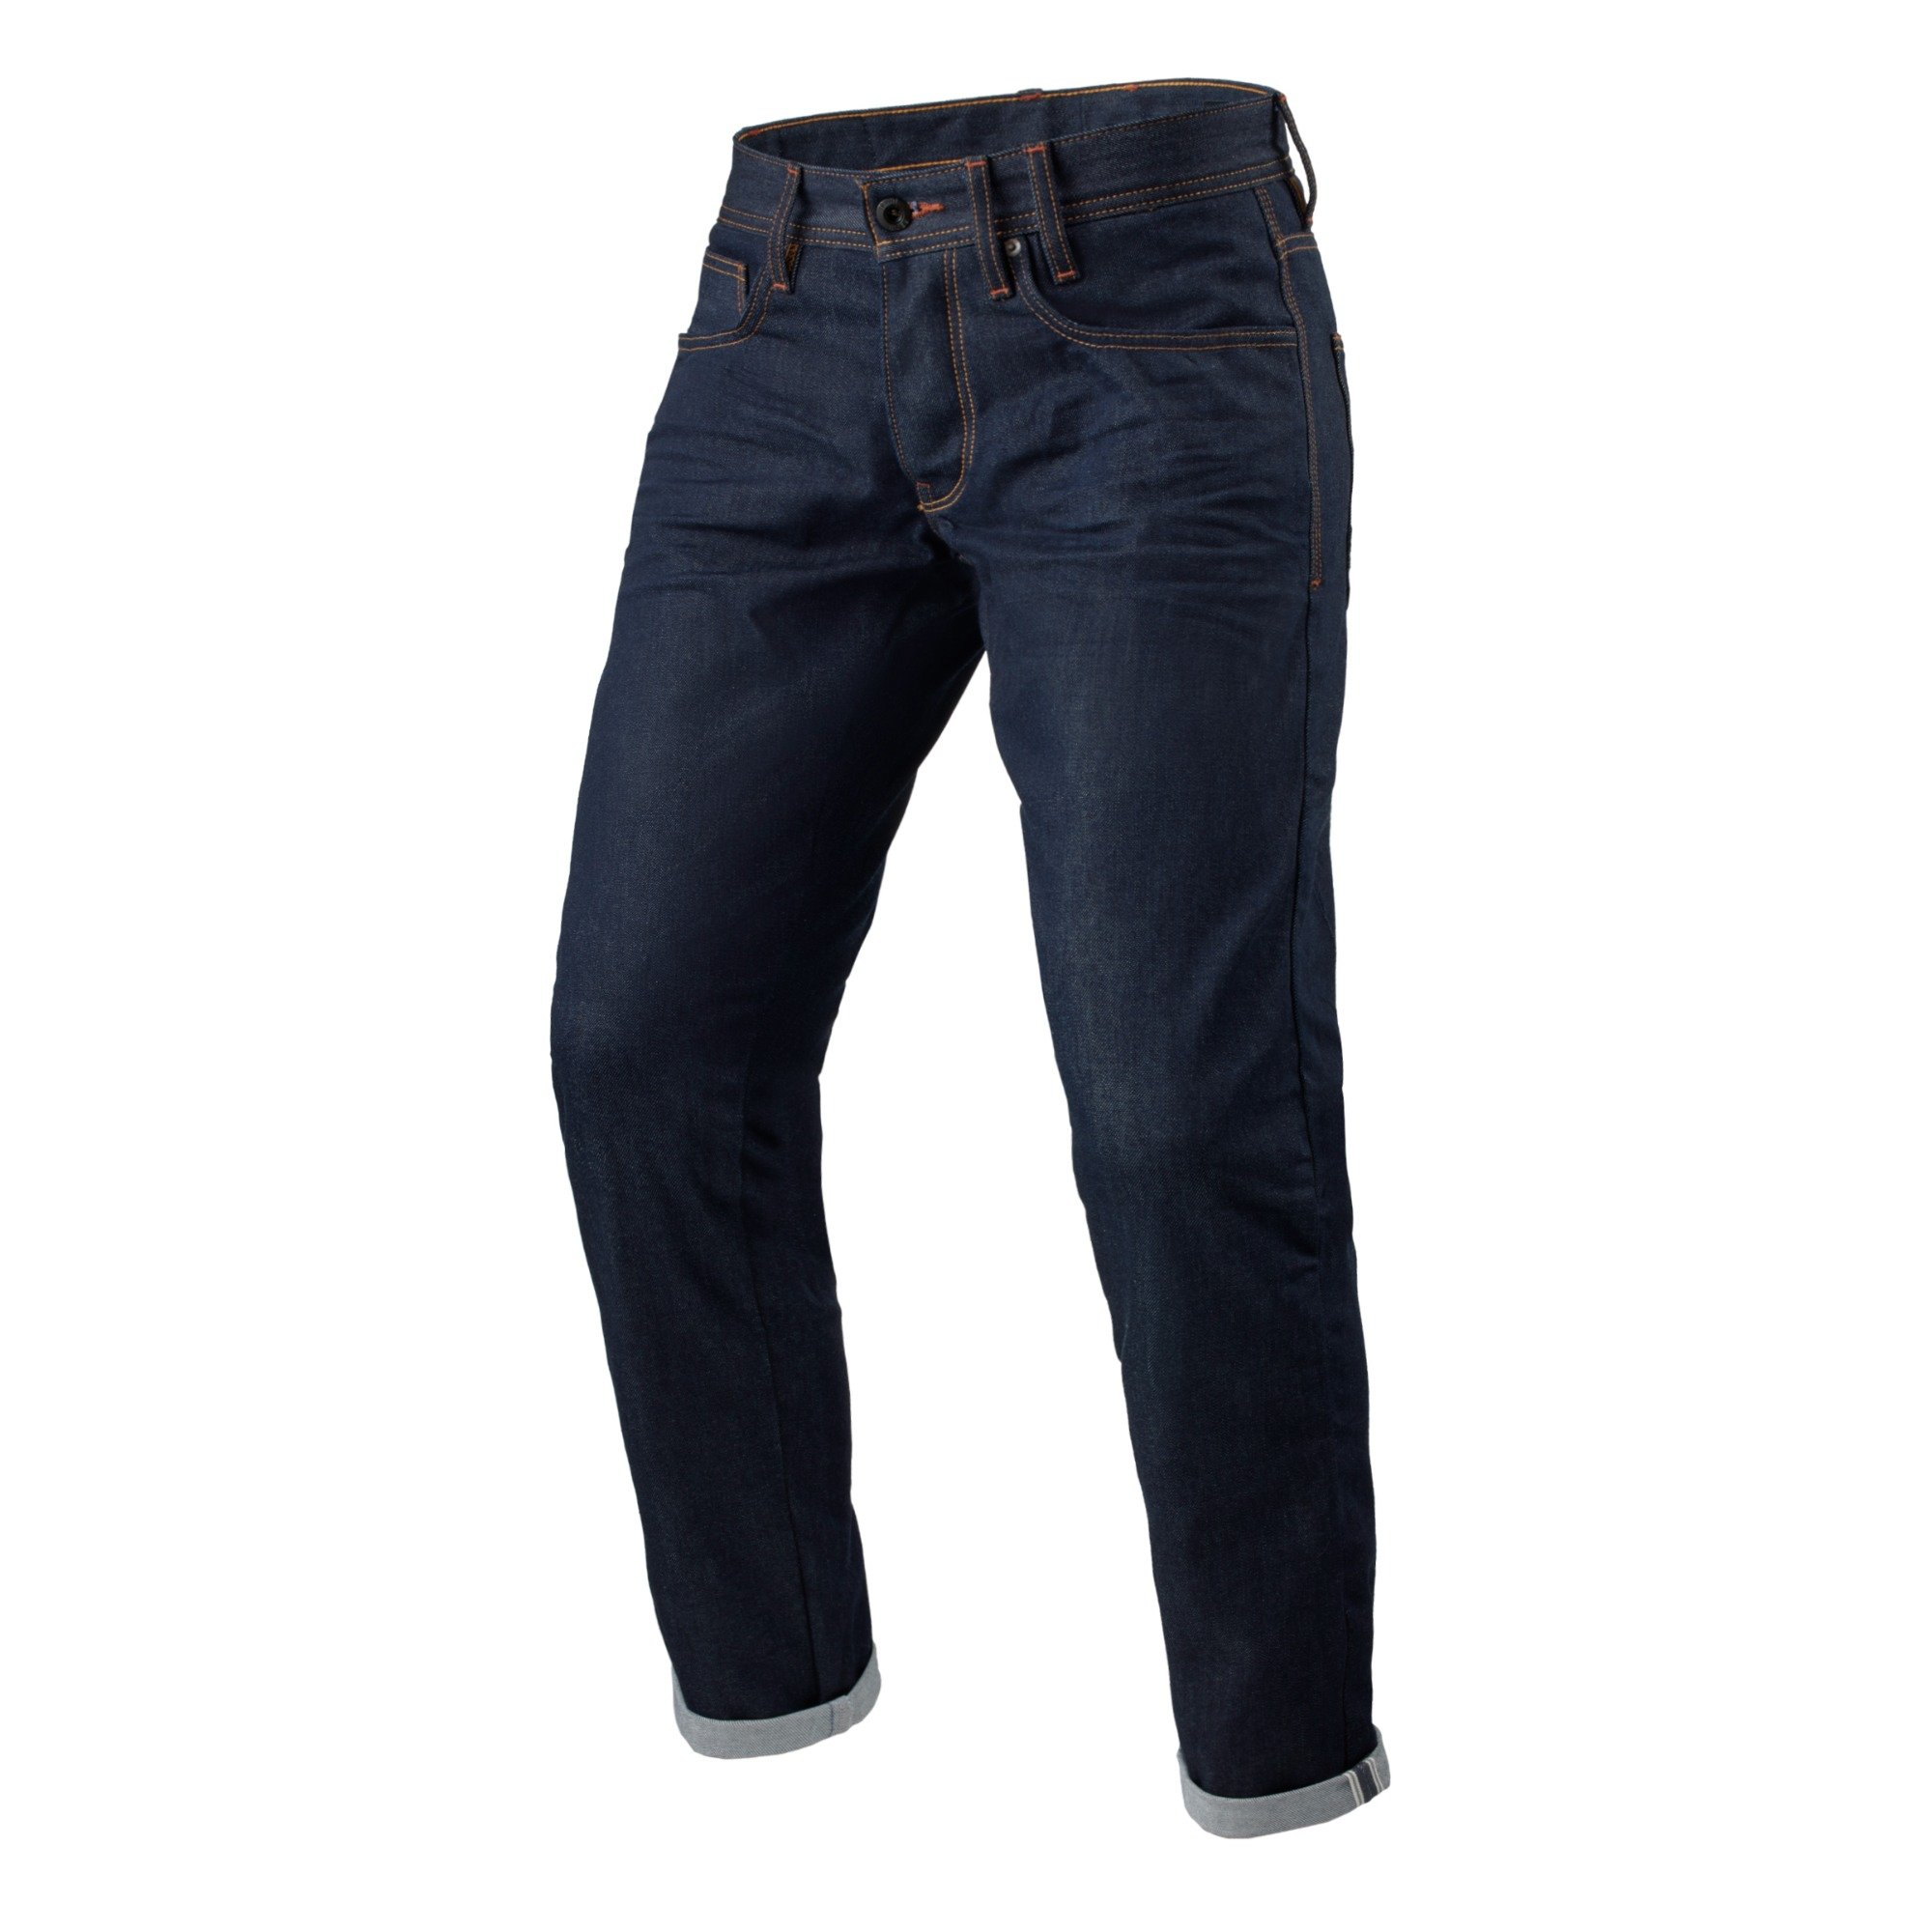 Image of REV'IT! Jeans Lewis Selvedge TF Dark Blue L34 Motorcycle Pants Size L34/W38 ID 8700001358002